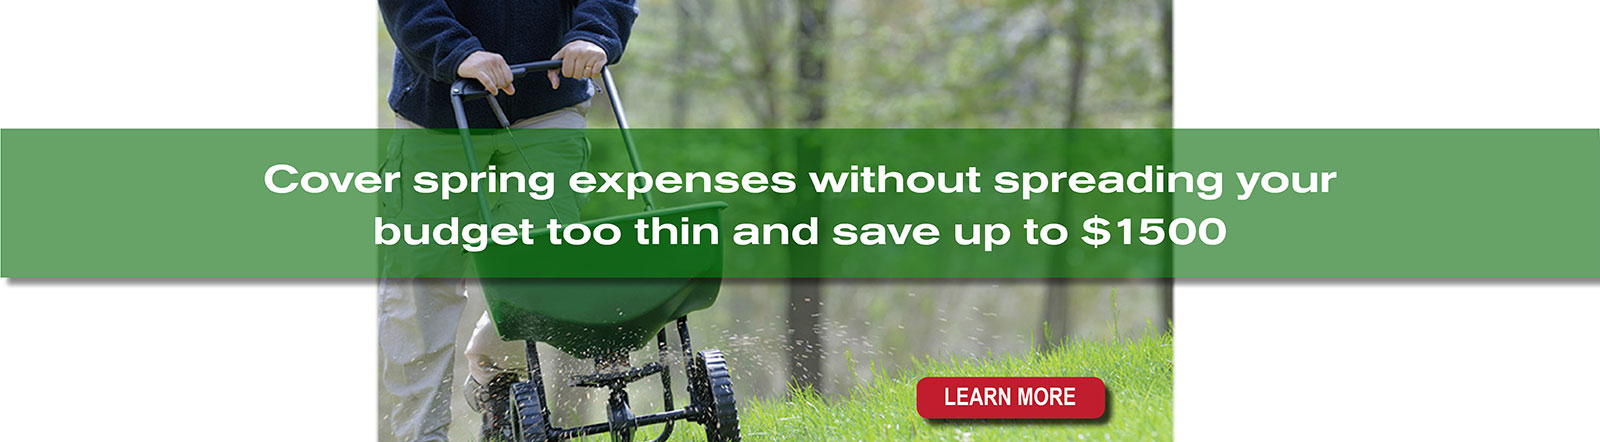 Cover spring expenses without spreading your budget too thin and save up to $1500